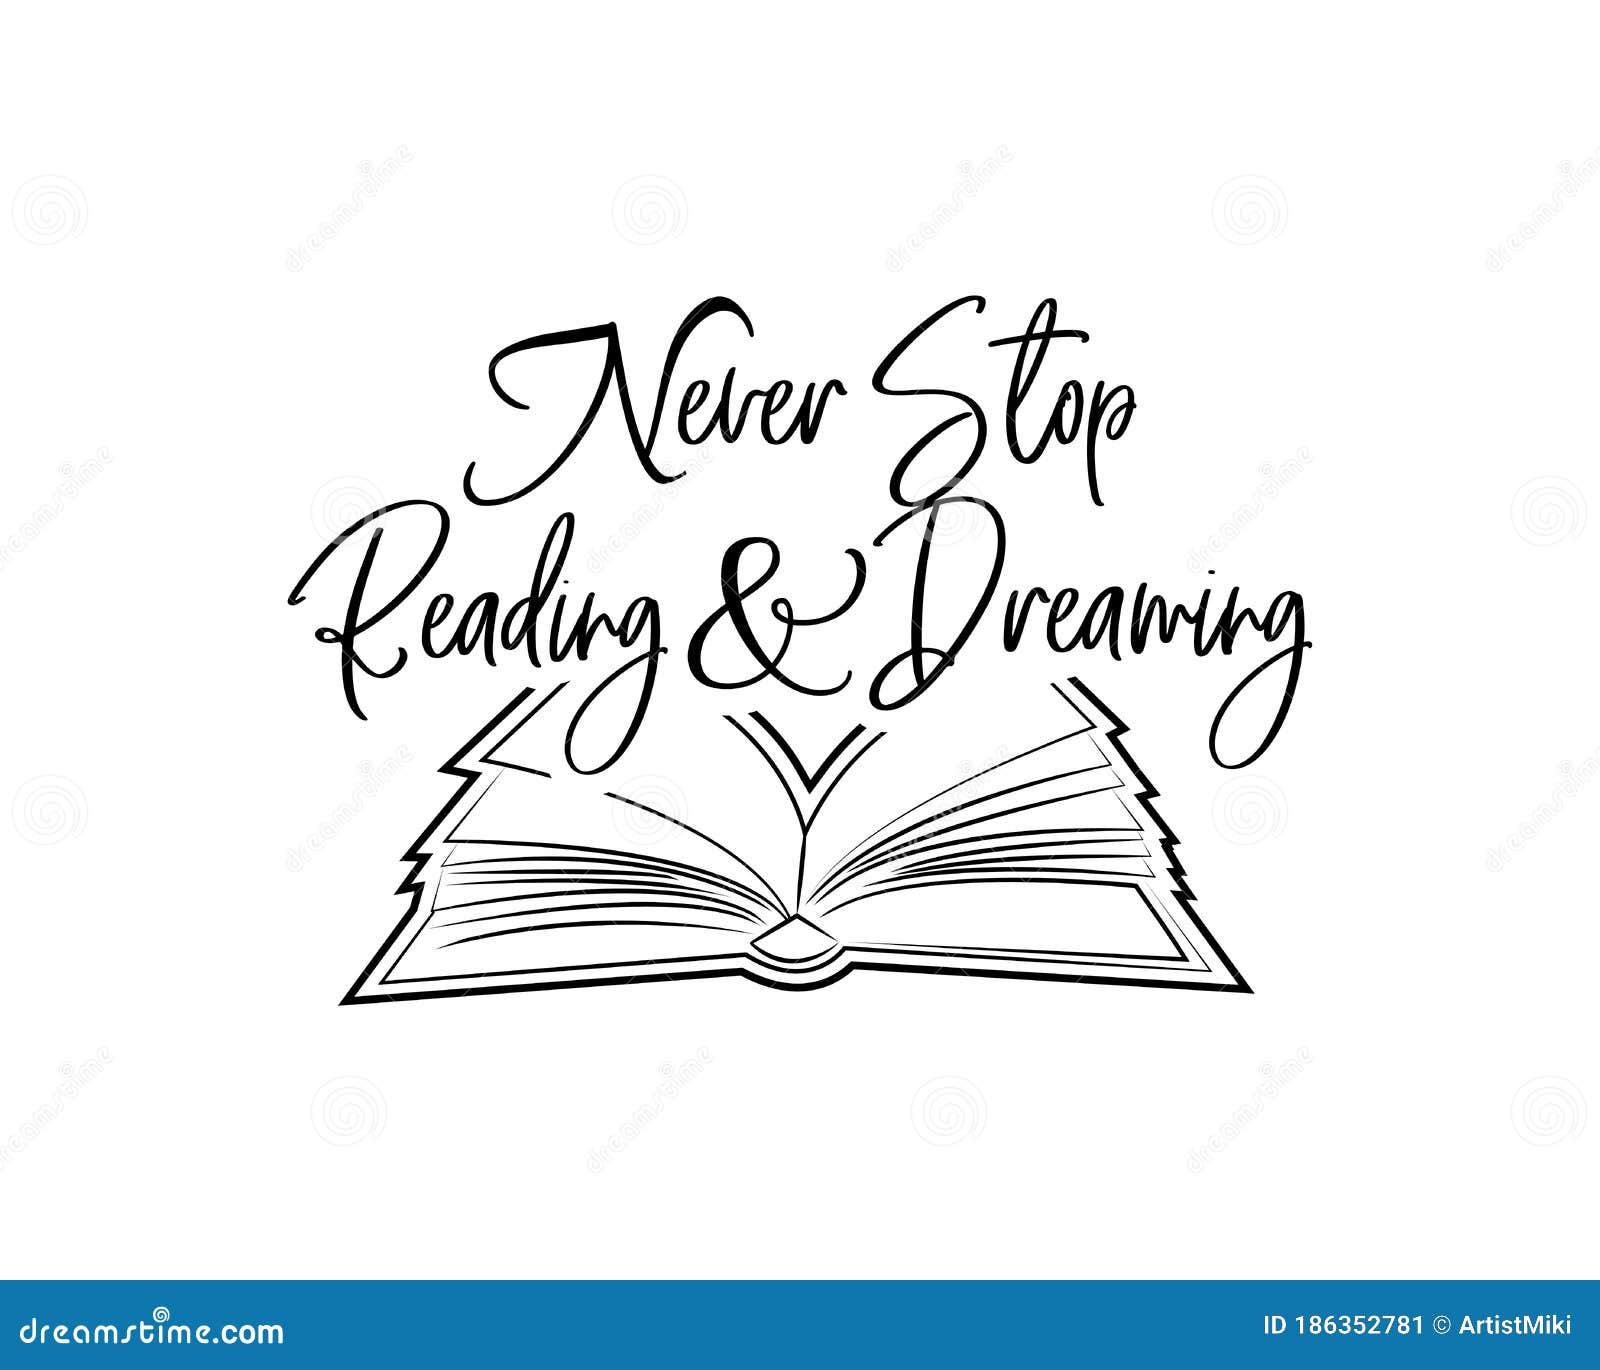 never stop reading and dreaming, , wording , lettering, minimalist poster . open book .